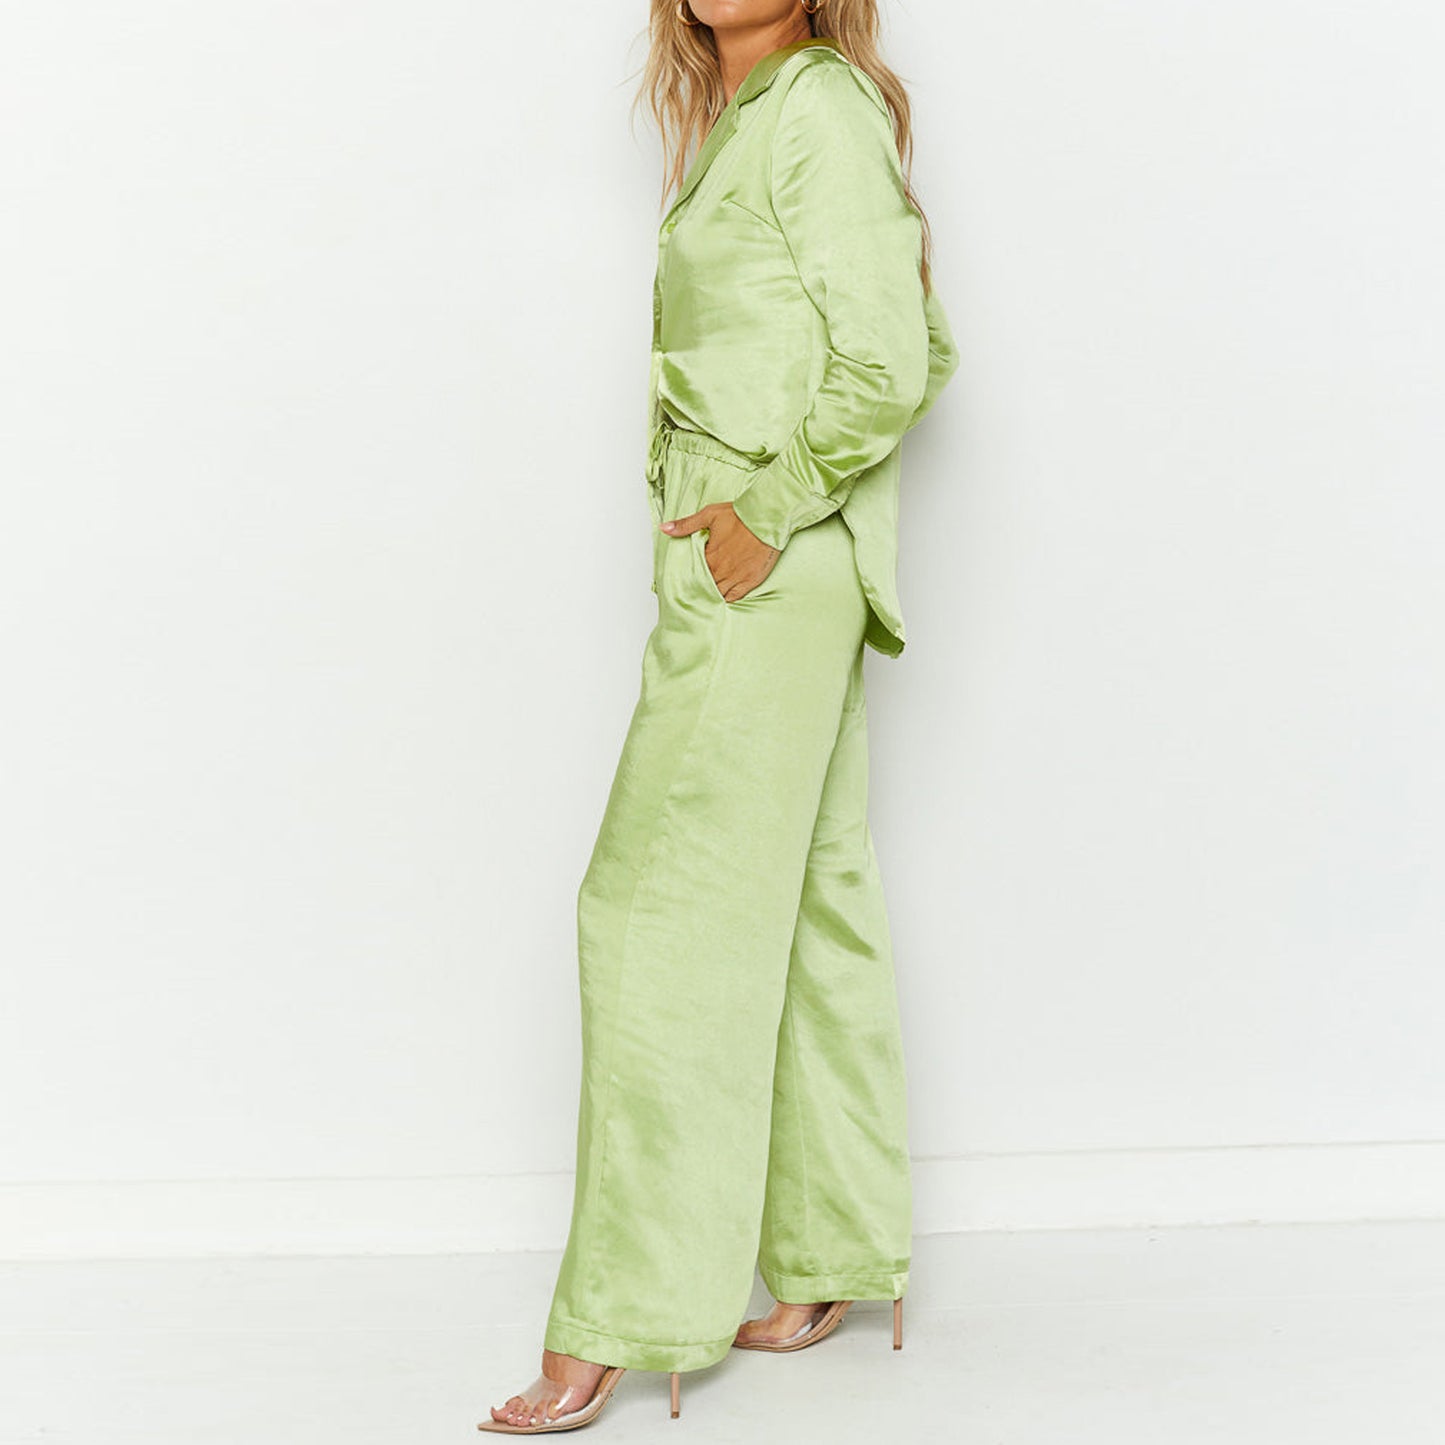 Casual Matching Blouse Pajama Sets For Women